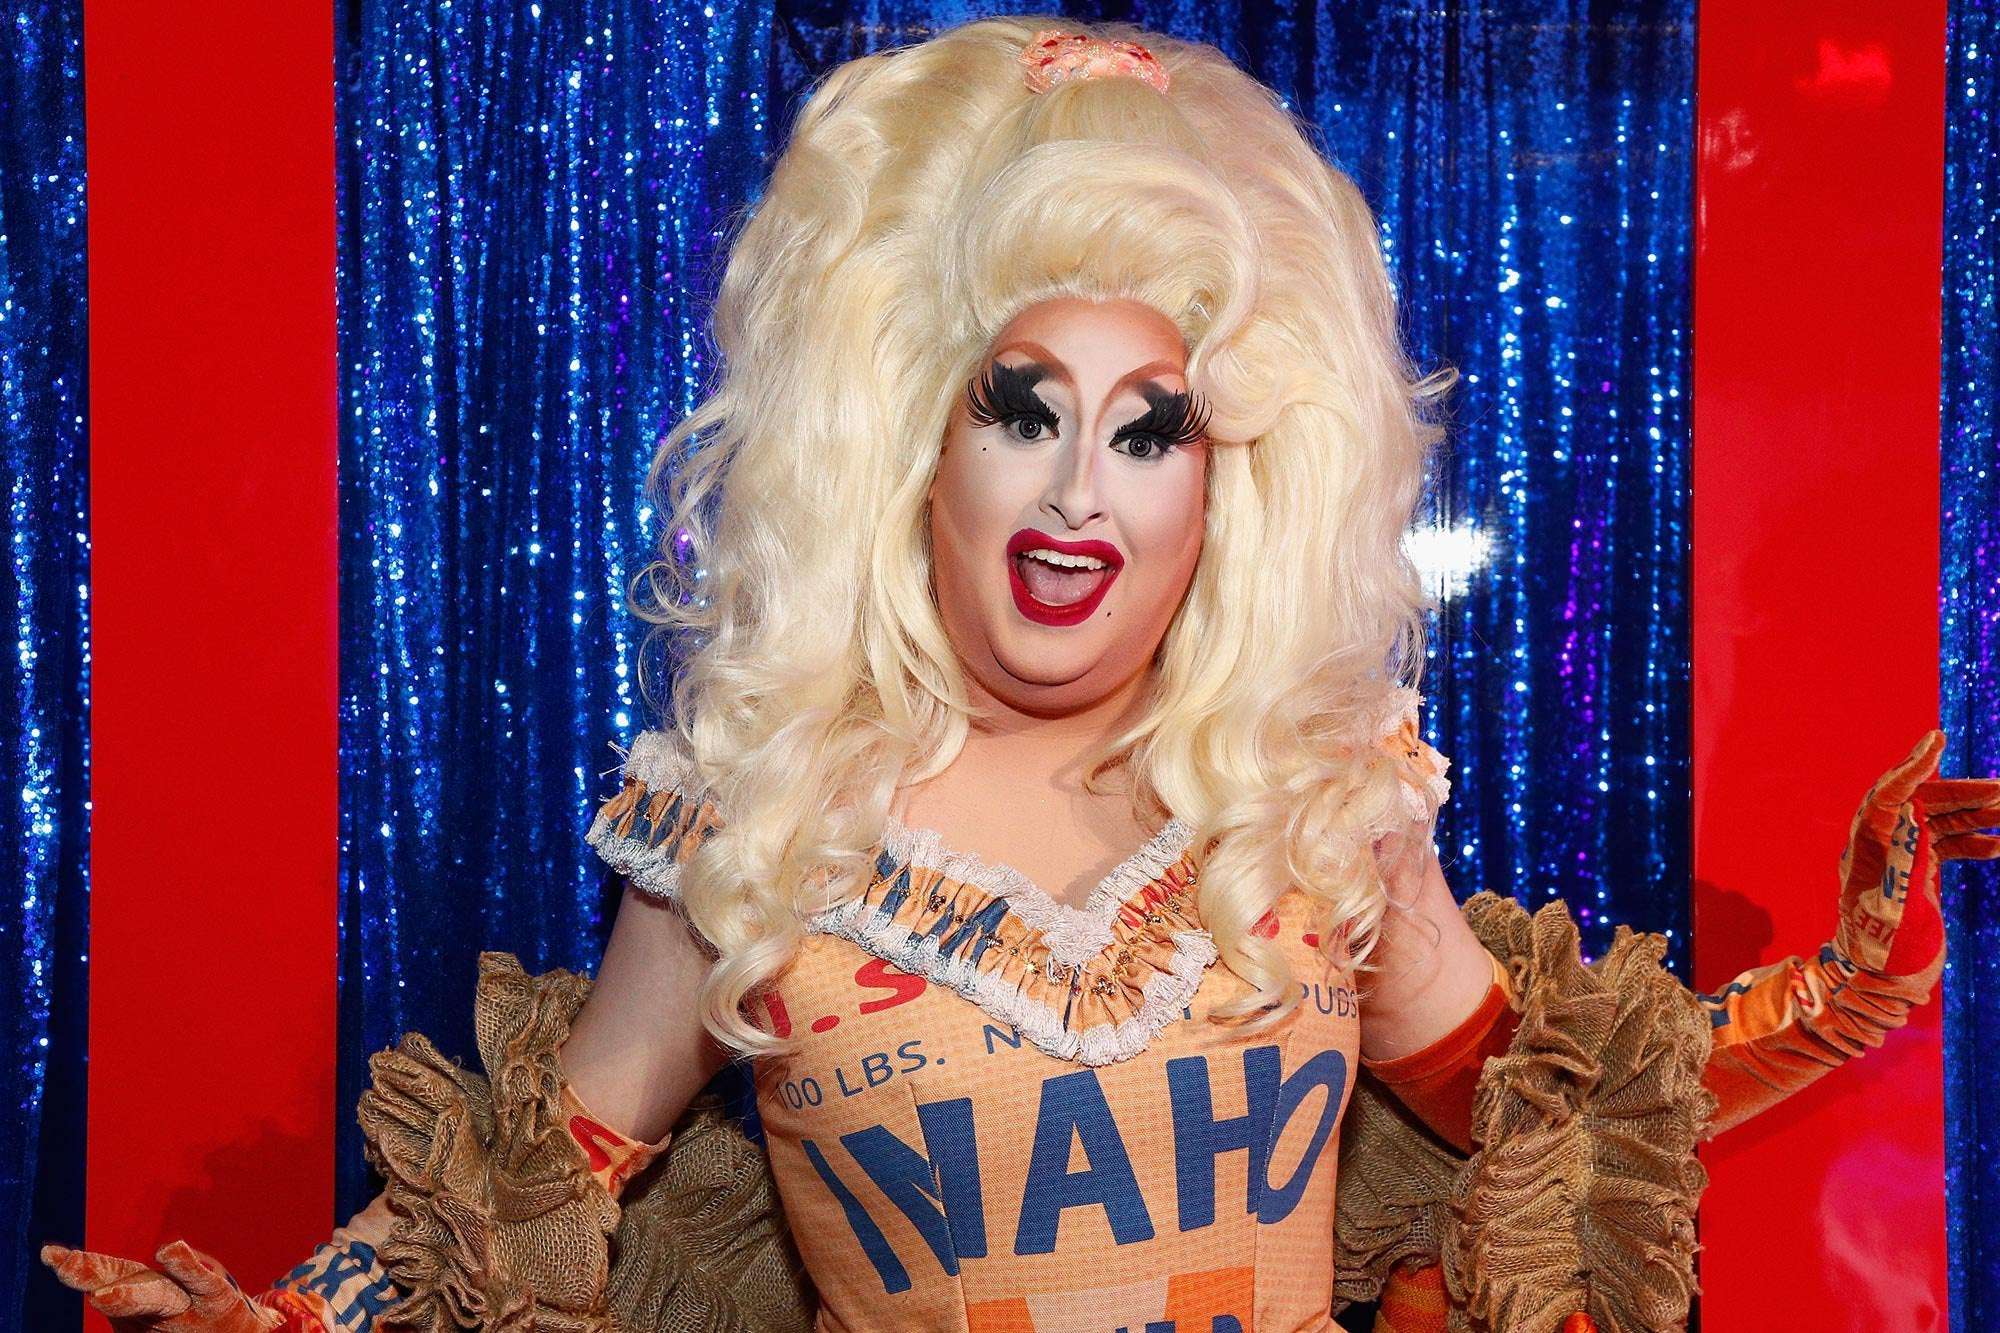 image for RuPaul's Drag Race disqualifies Sherry Pie over catfishing allegations